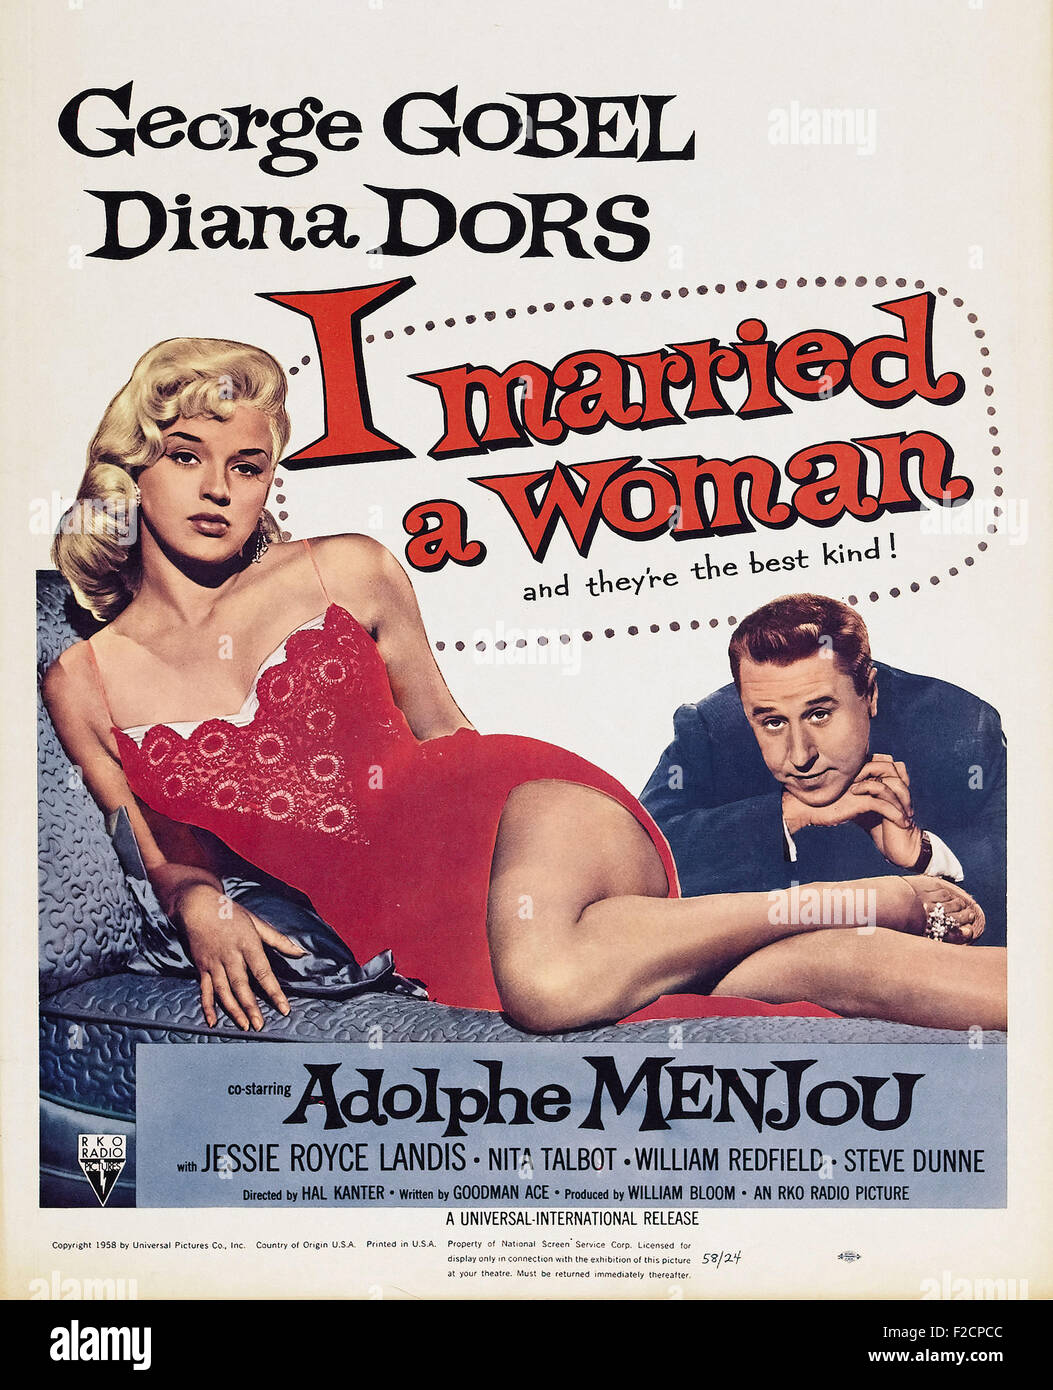 I Married a Woman 03 - Movie Poster Stock Photo